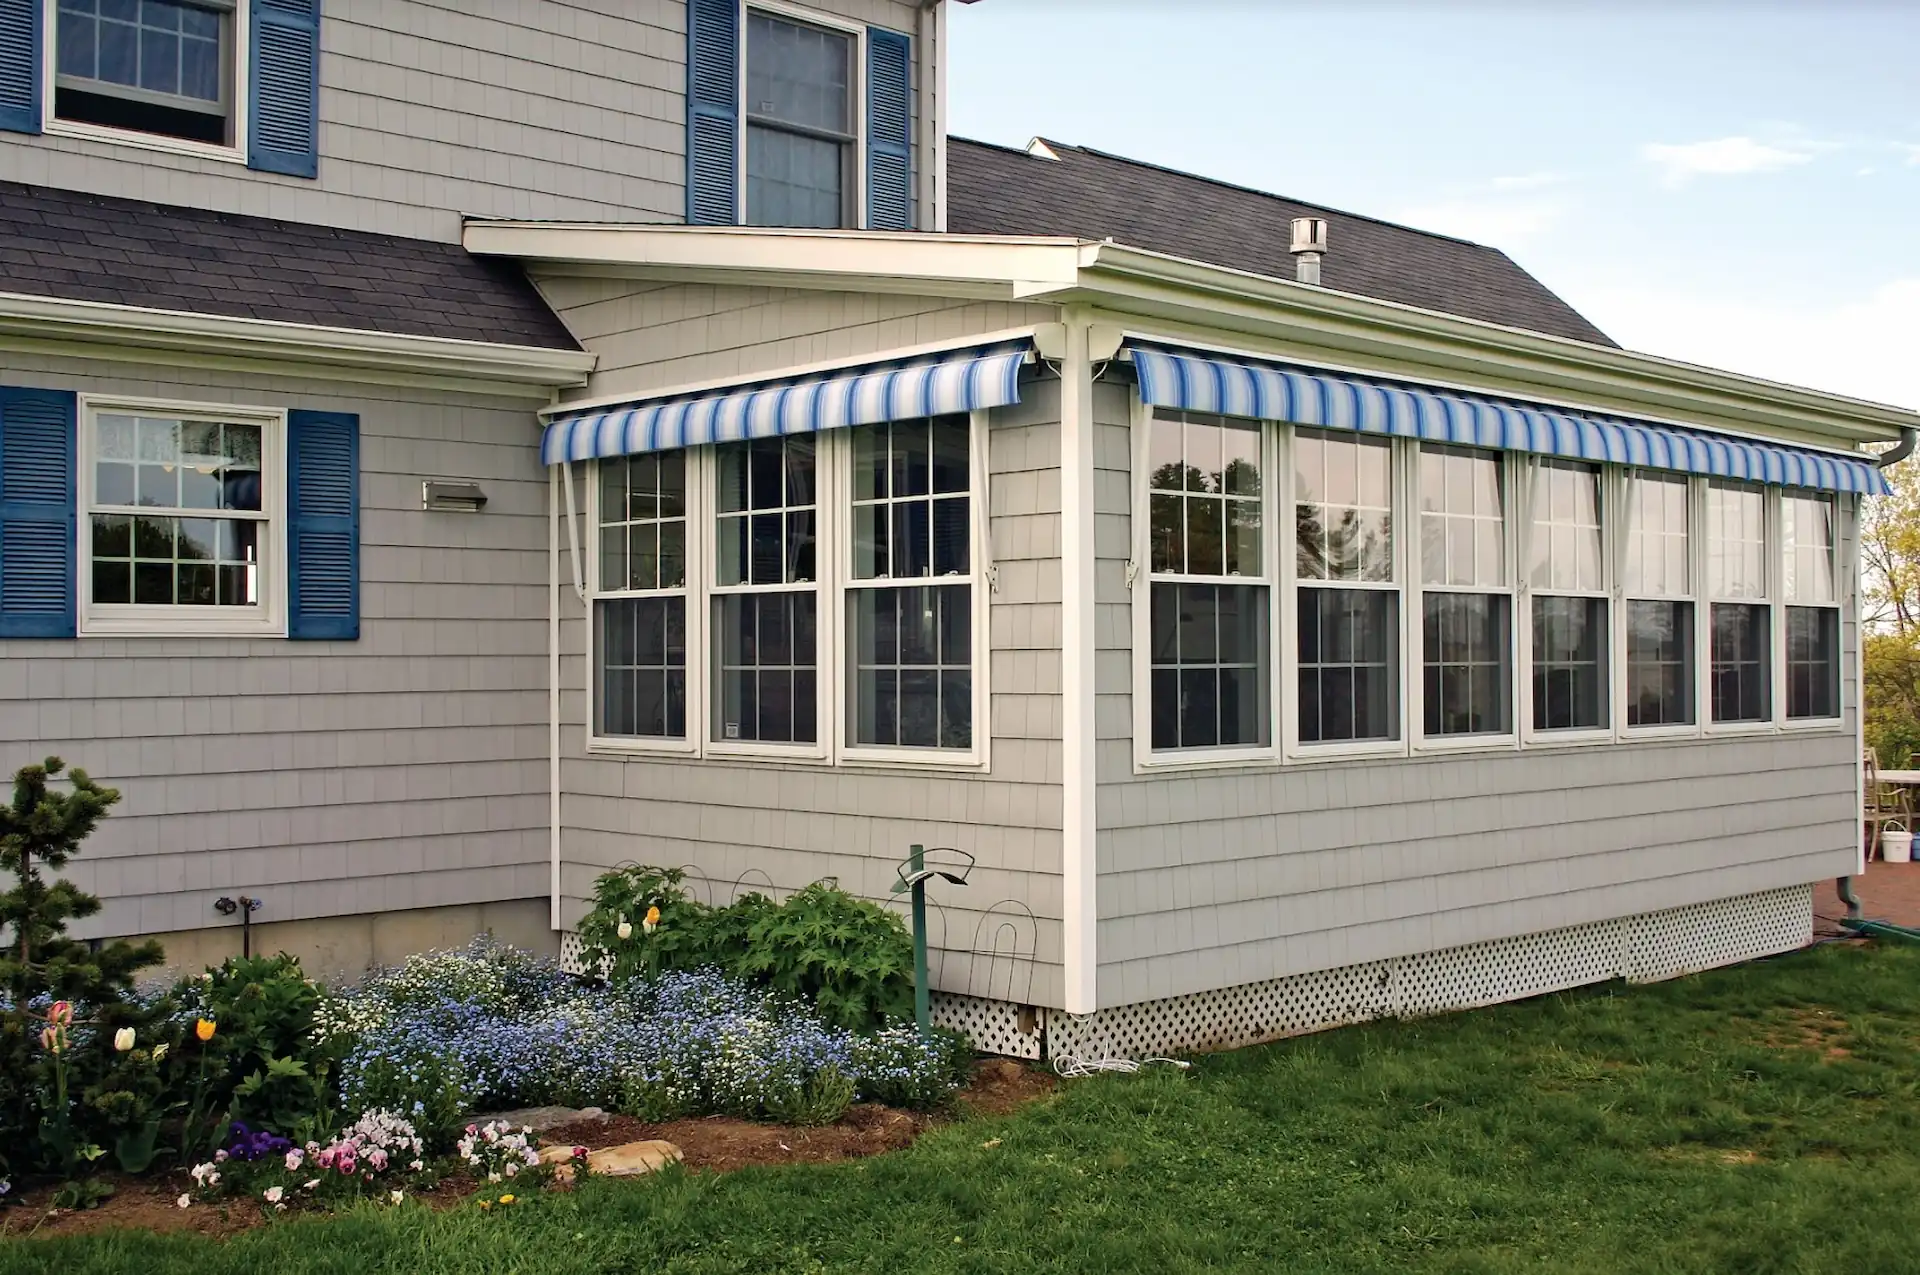 Exterior shot of a sun room lined with fabric awnings in their retracted position. Knowing when your retractable awnings should be in their closed position is crucical to maintaining their longevity.